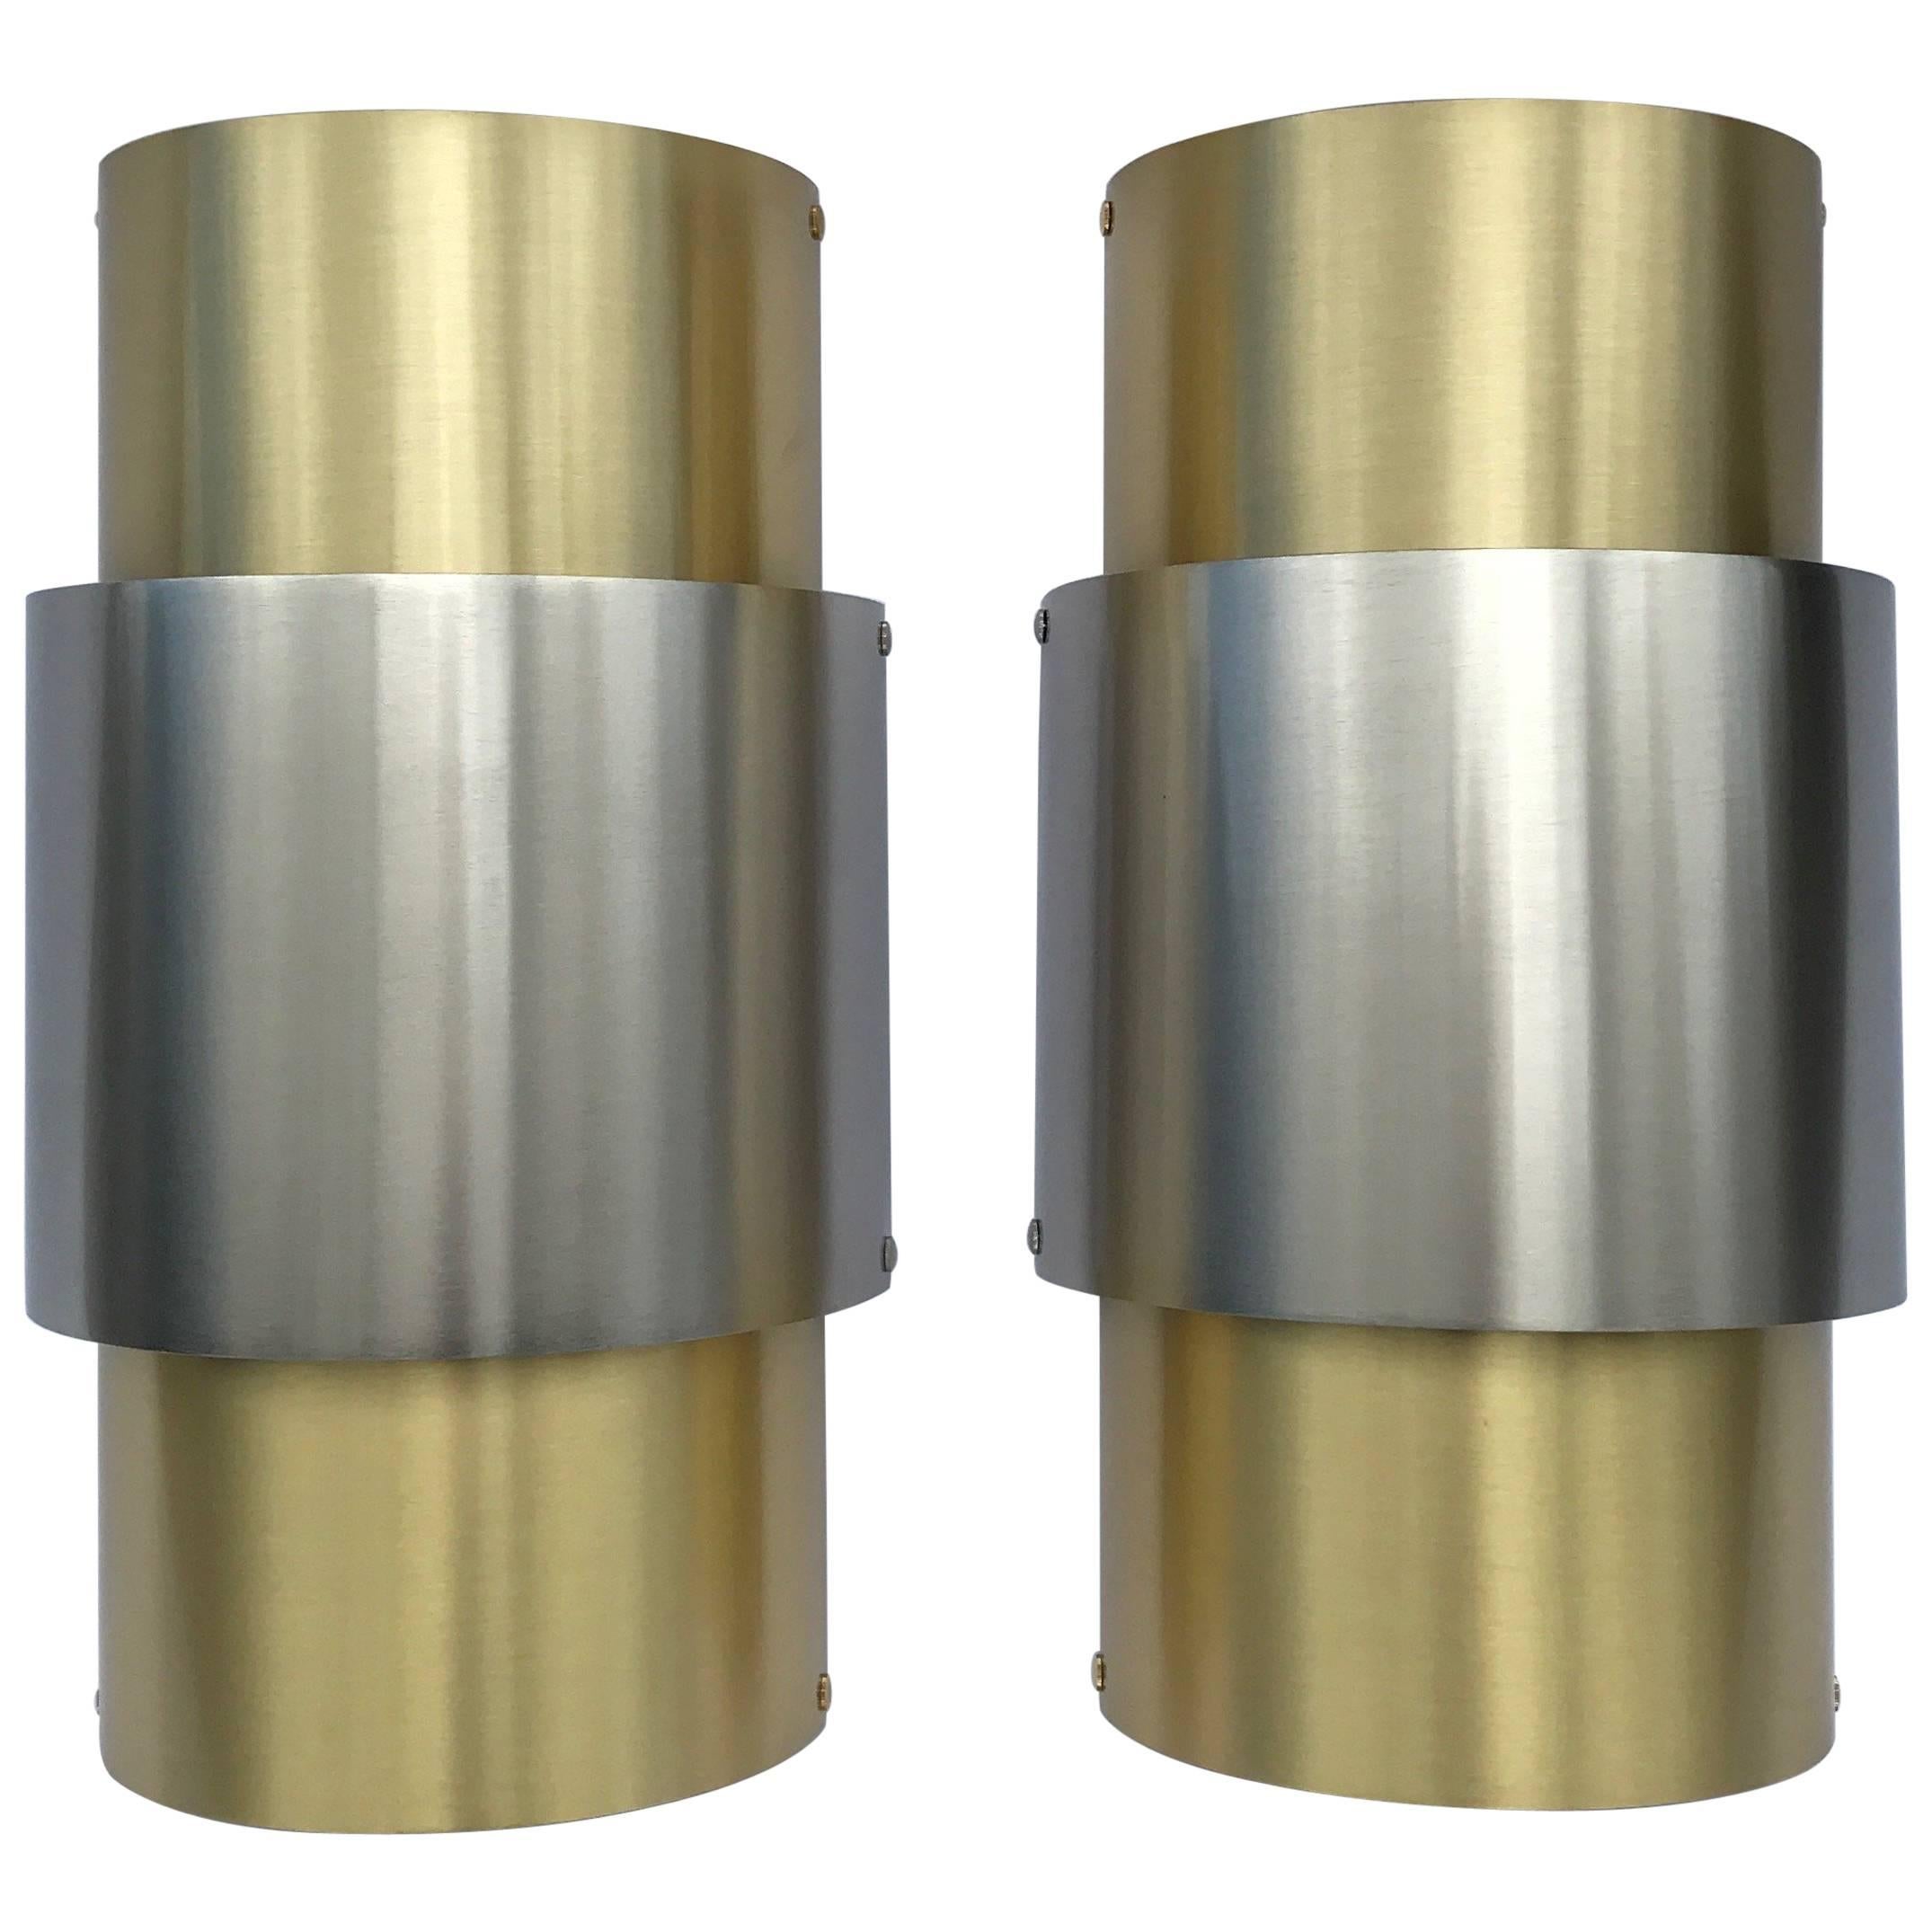 Pair of 'Barrel' Brushed Nickel and Brass Italian Wall Lights